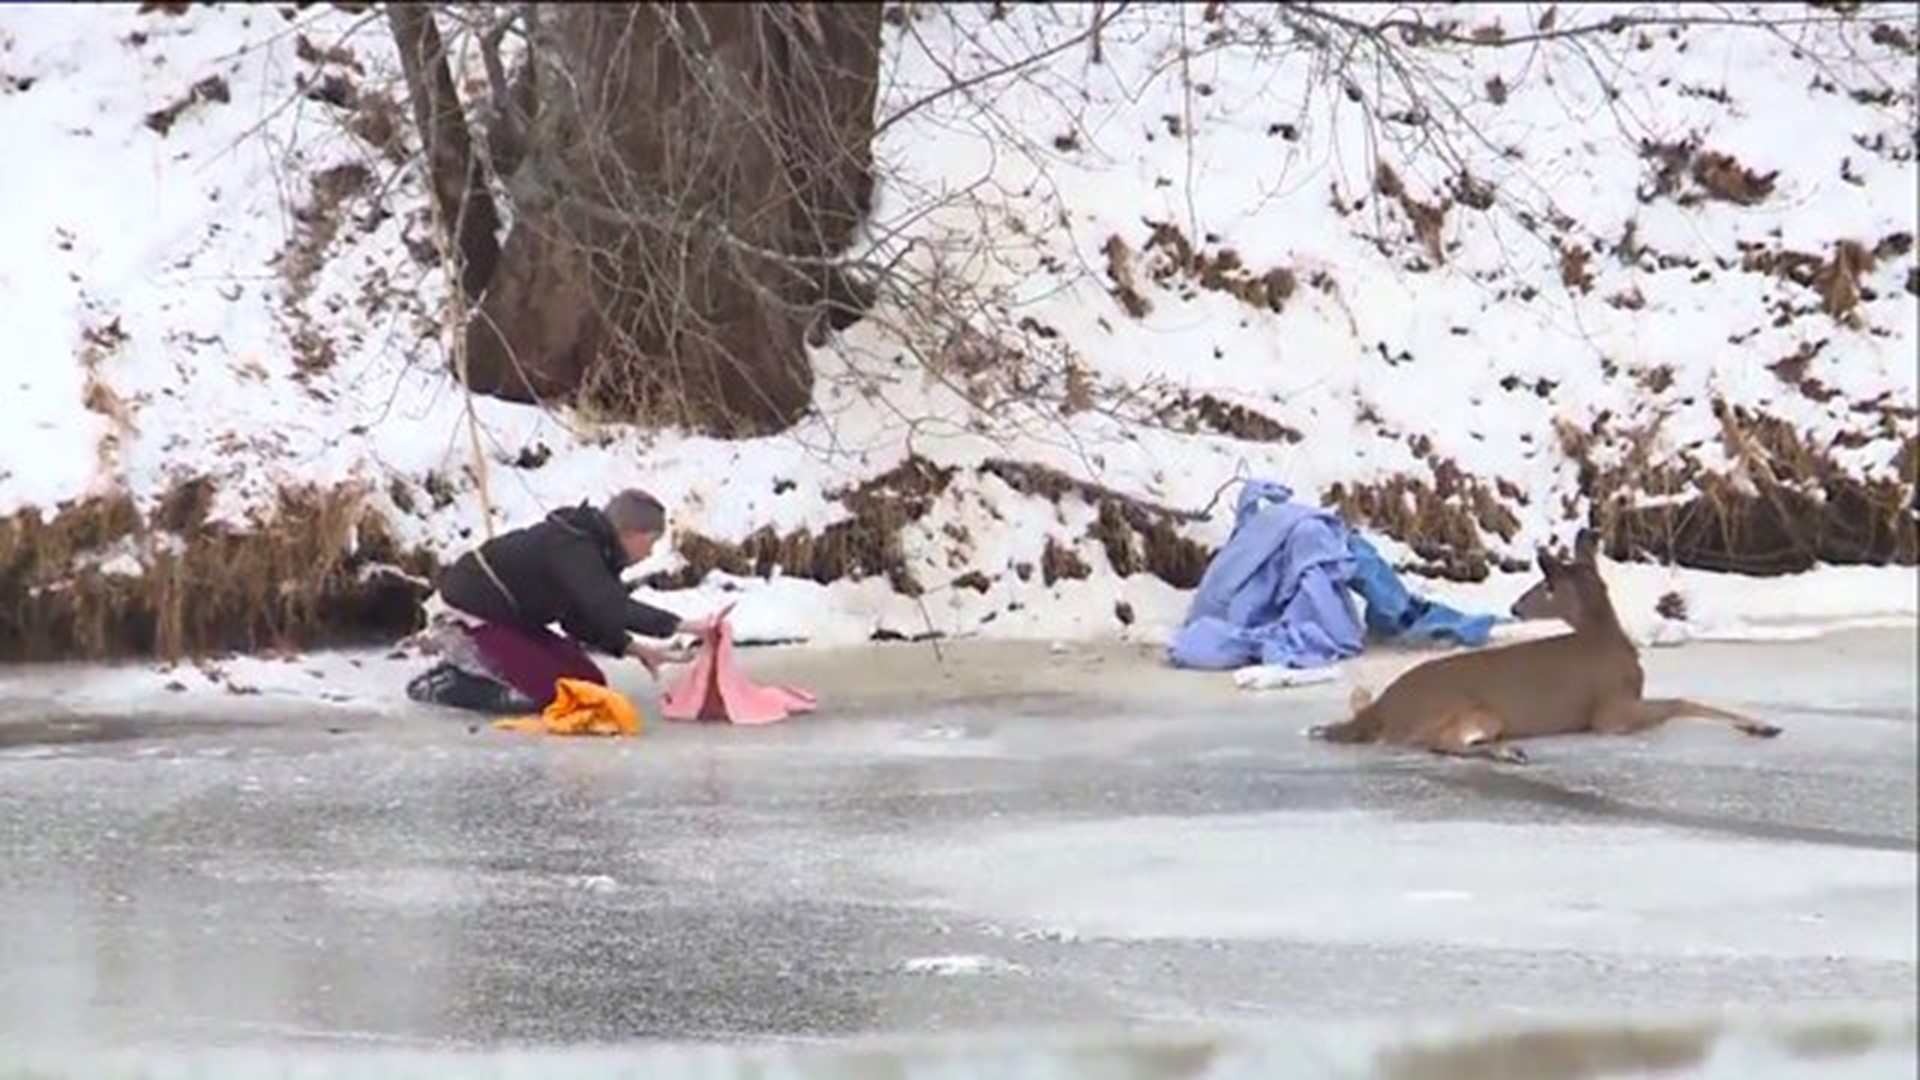 Raw video: Deer rescued after getting stuck on ice for hours in Simsbury